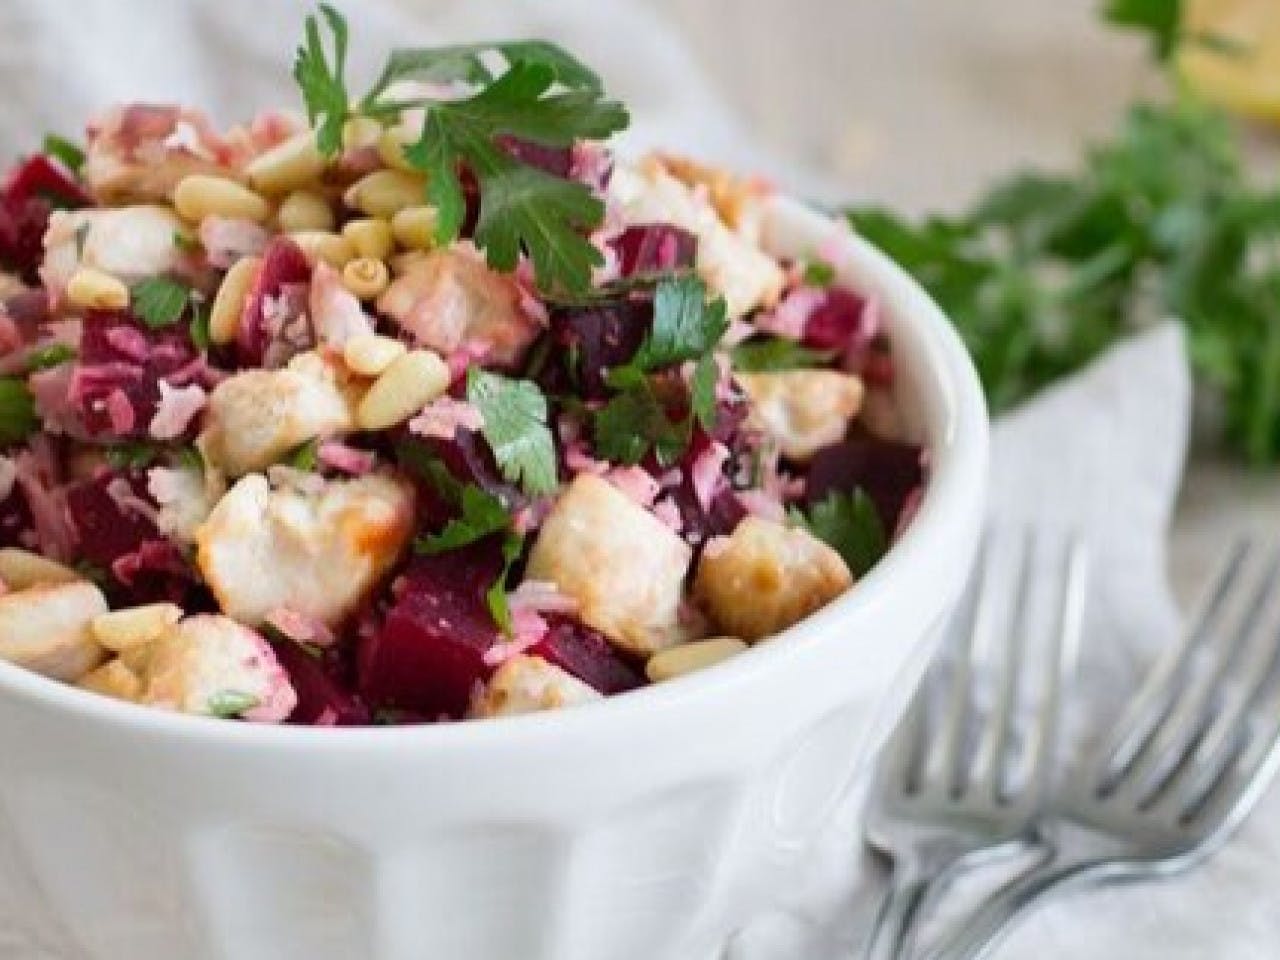 Cauliflower tabbouleh with red beets